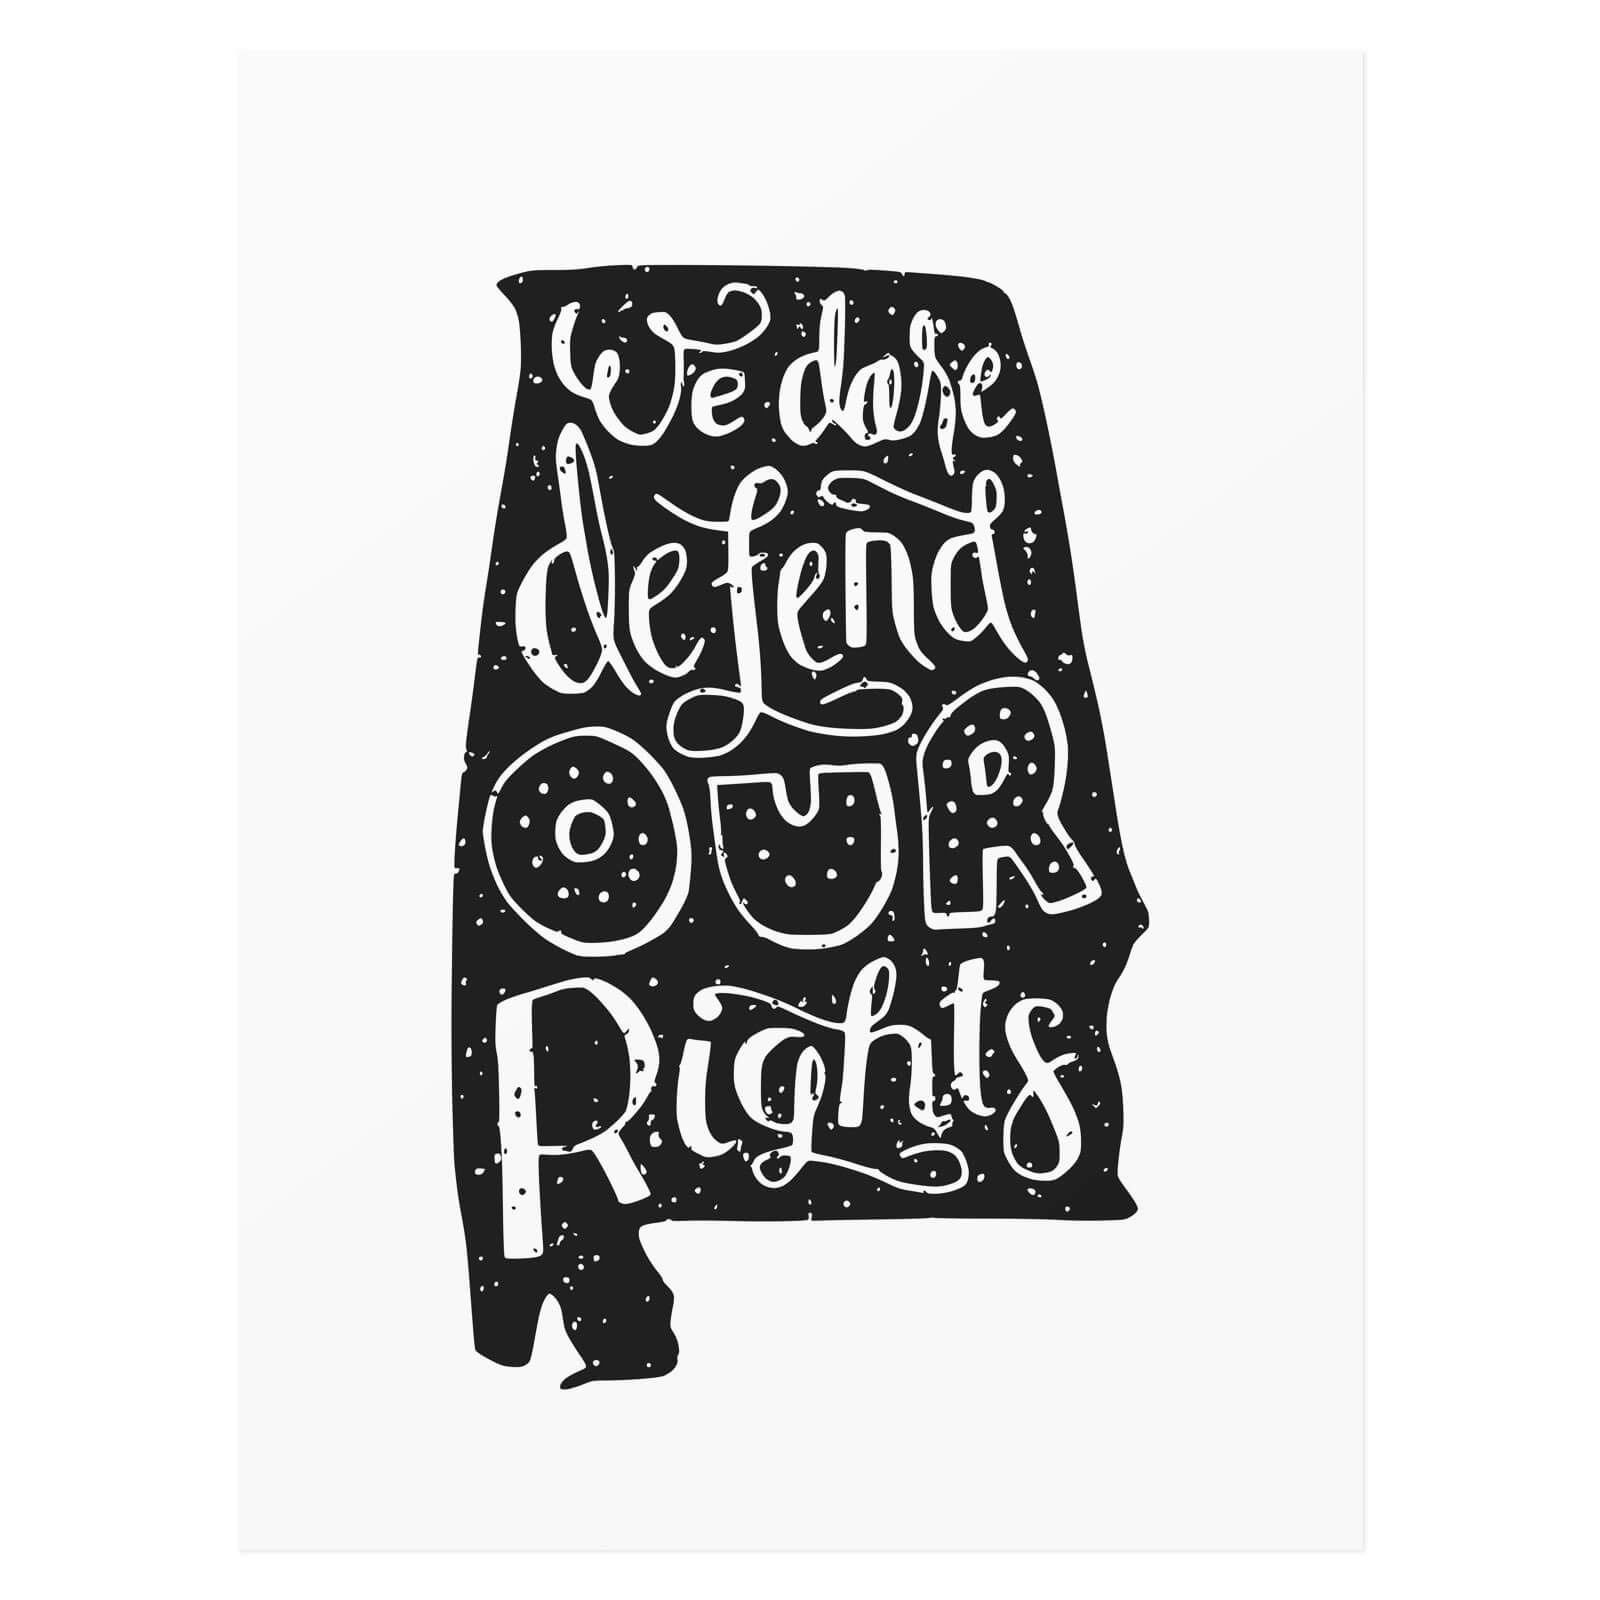 Alabama — We dare defend our rights